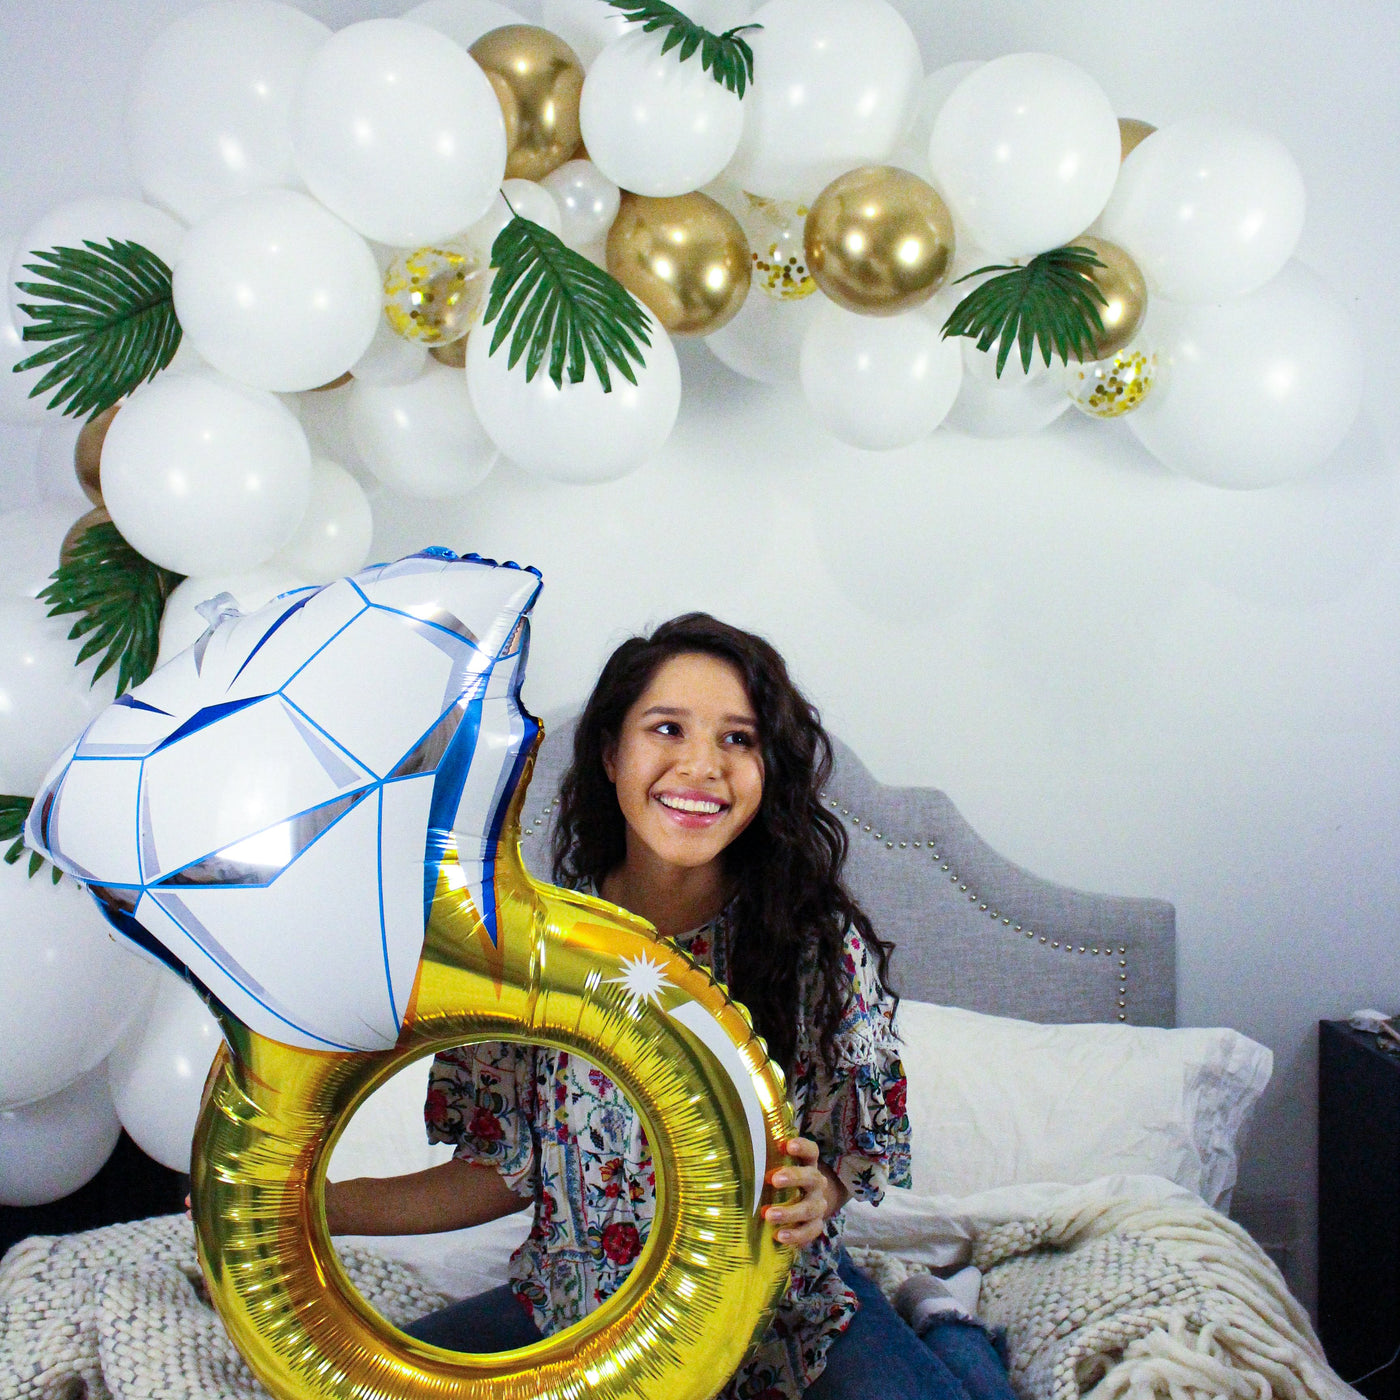 DIY Balloon Garland in White & Gold including balloons colored white, gold, and clear with gold confetti